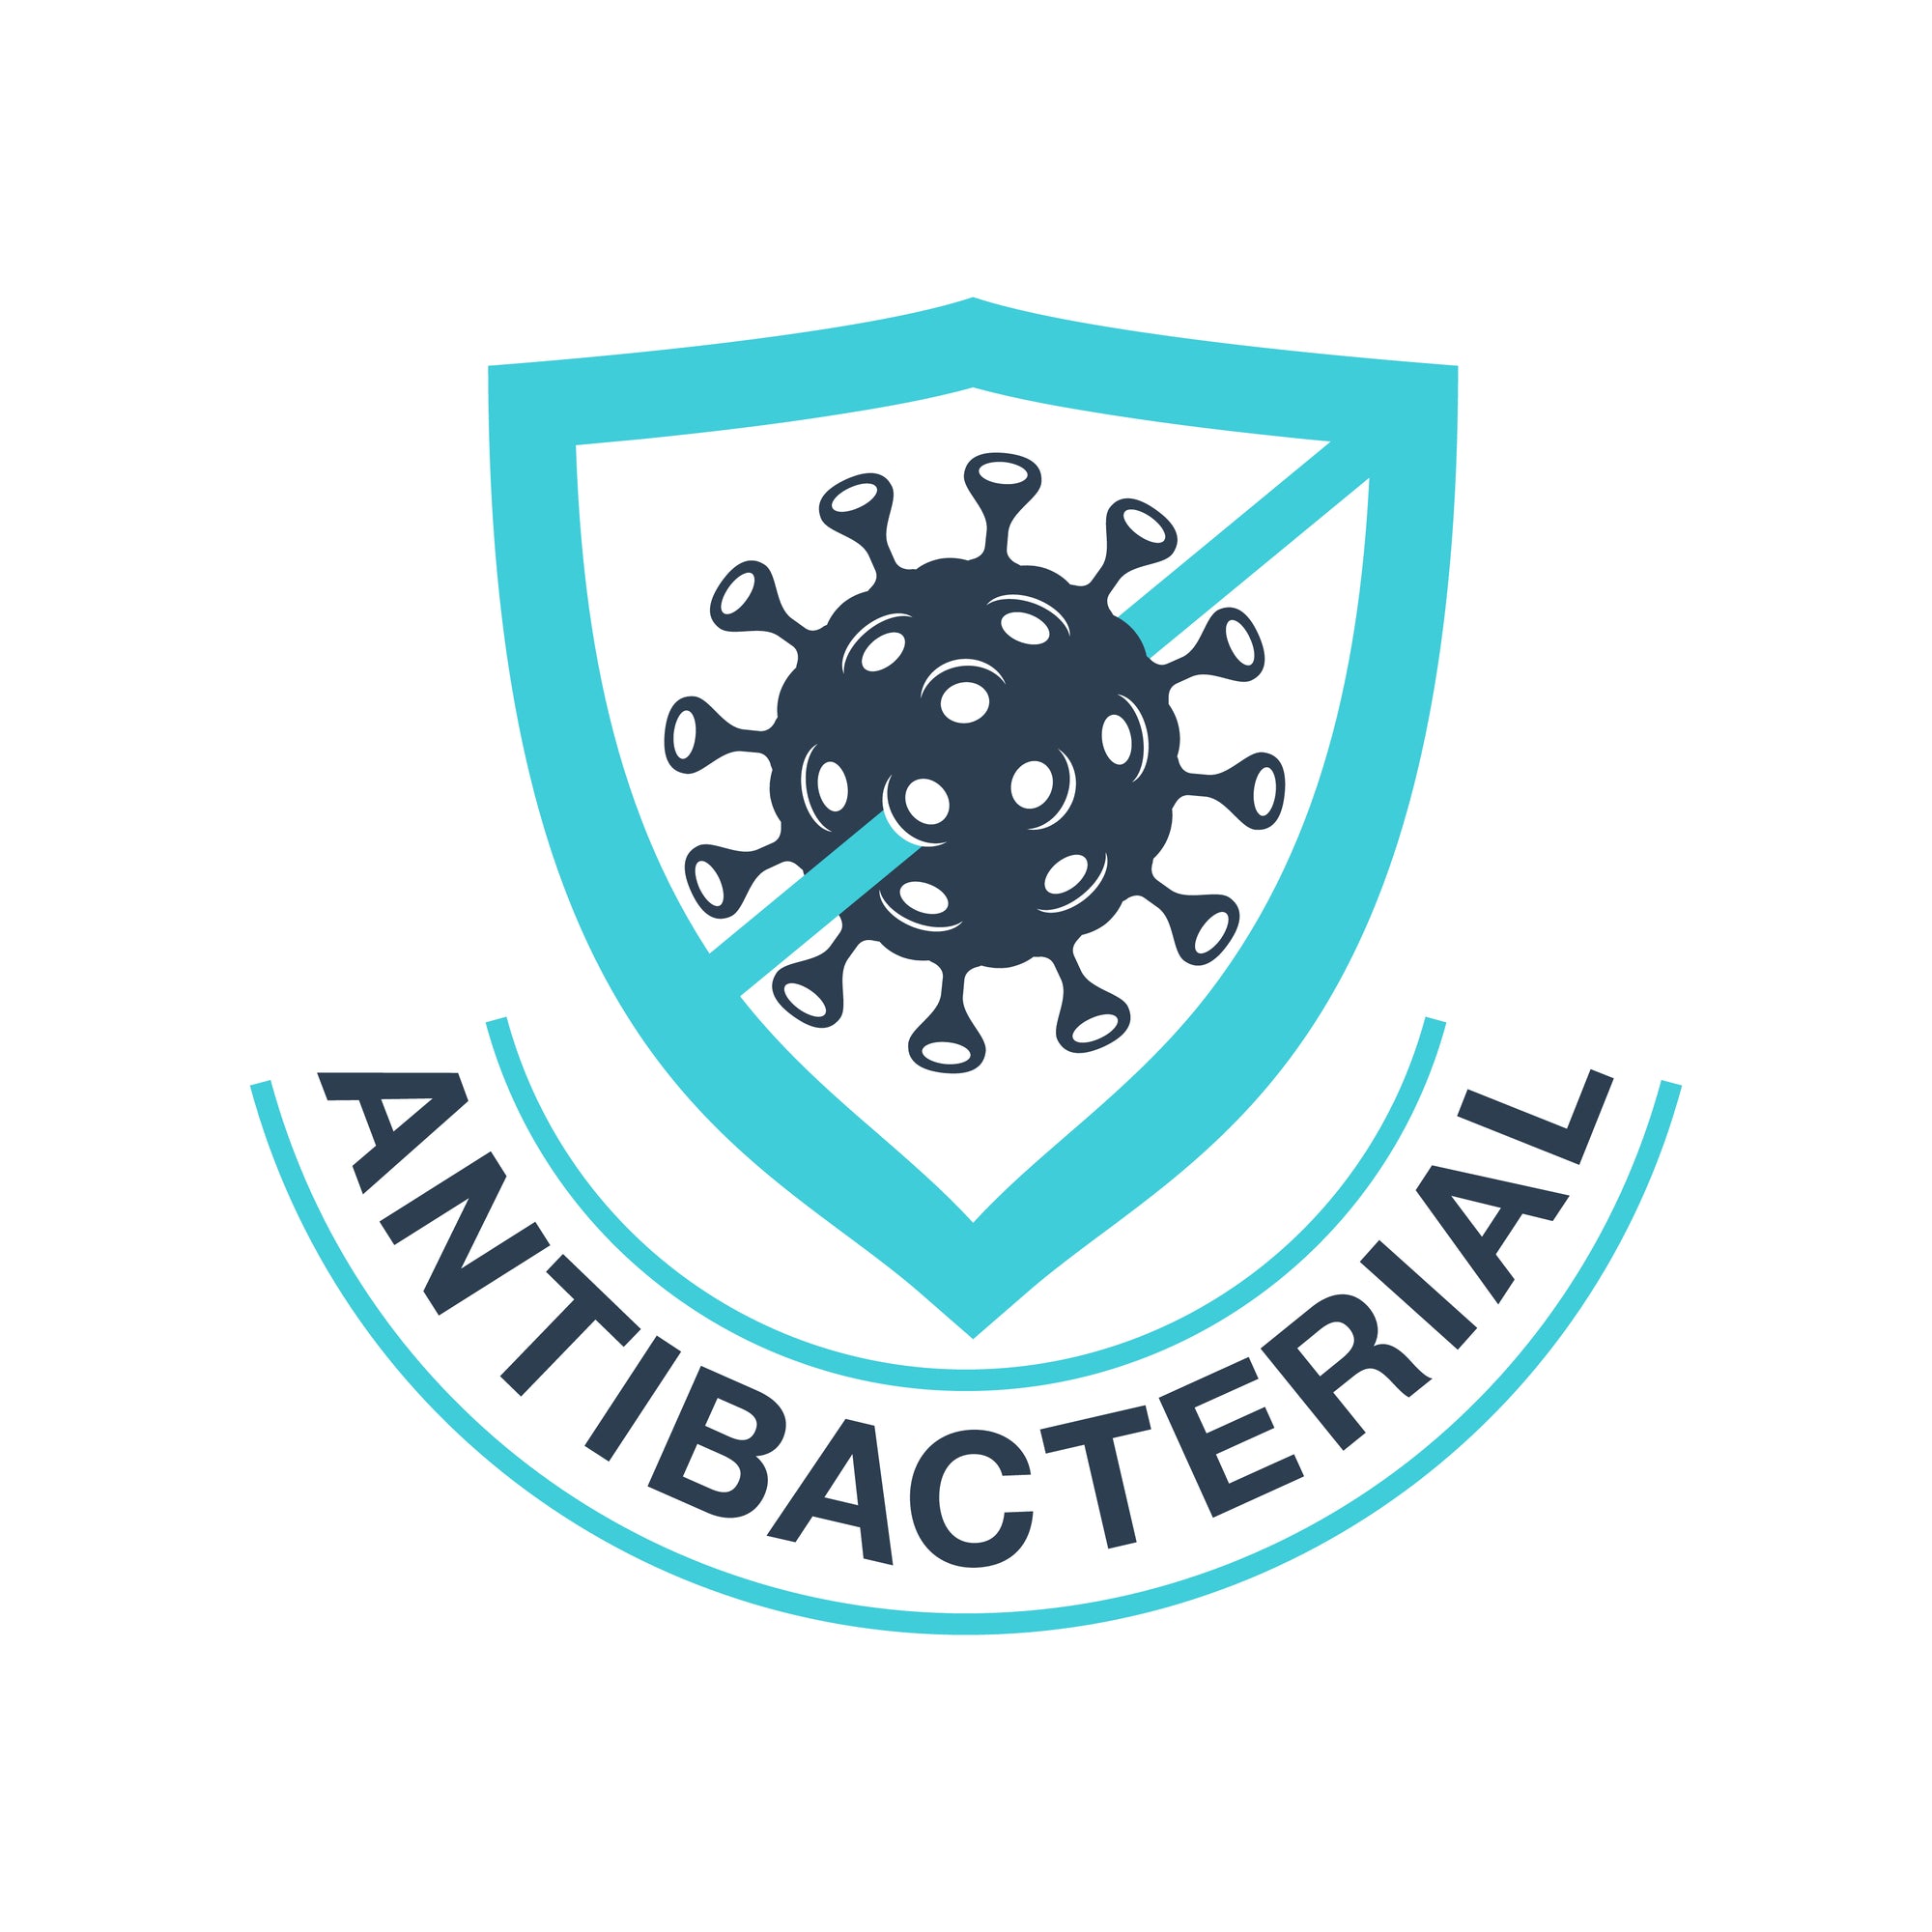 The New Age of Antibac